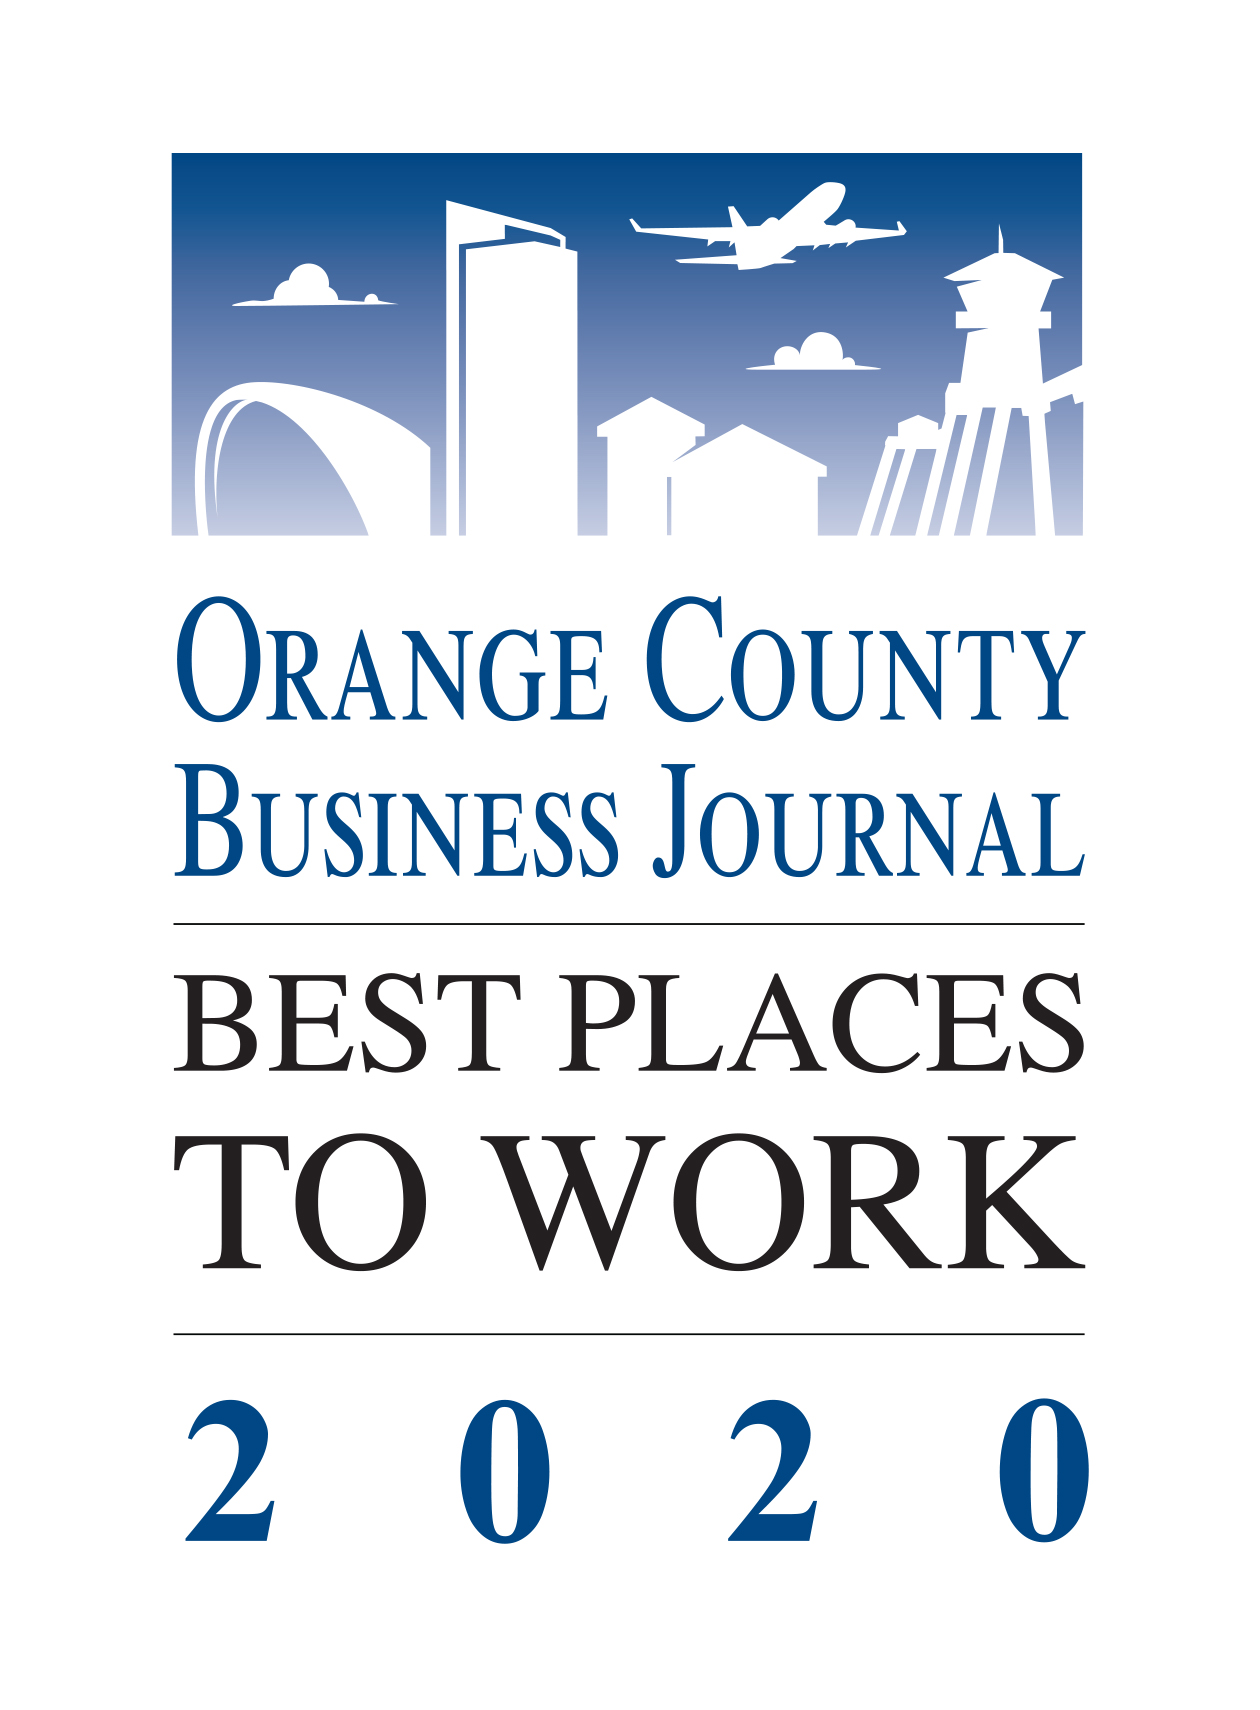 best place to work award logo 2020